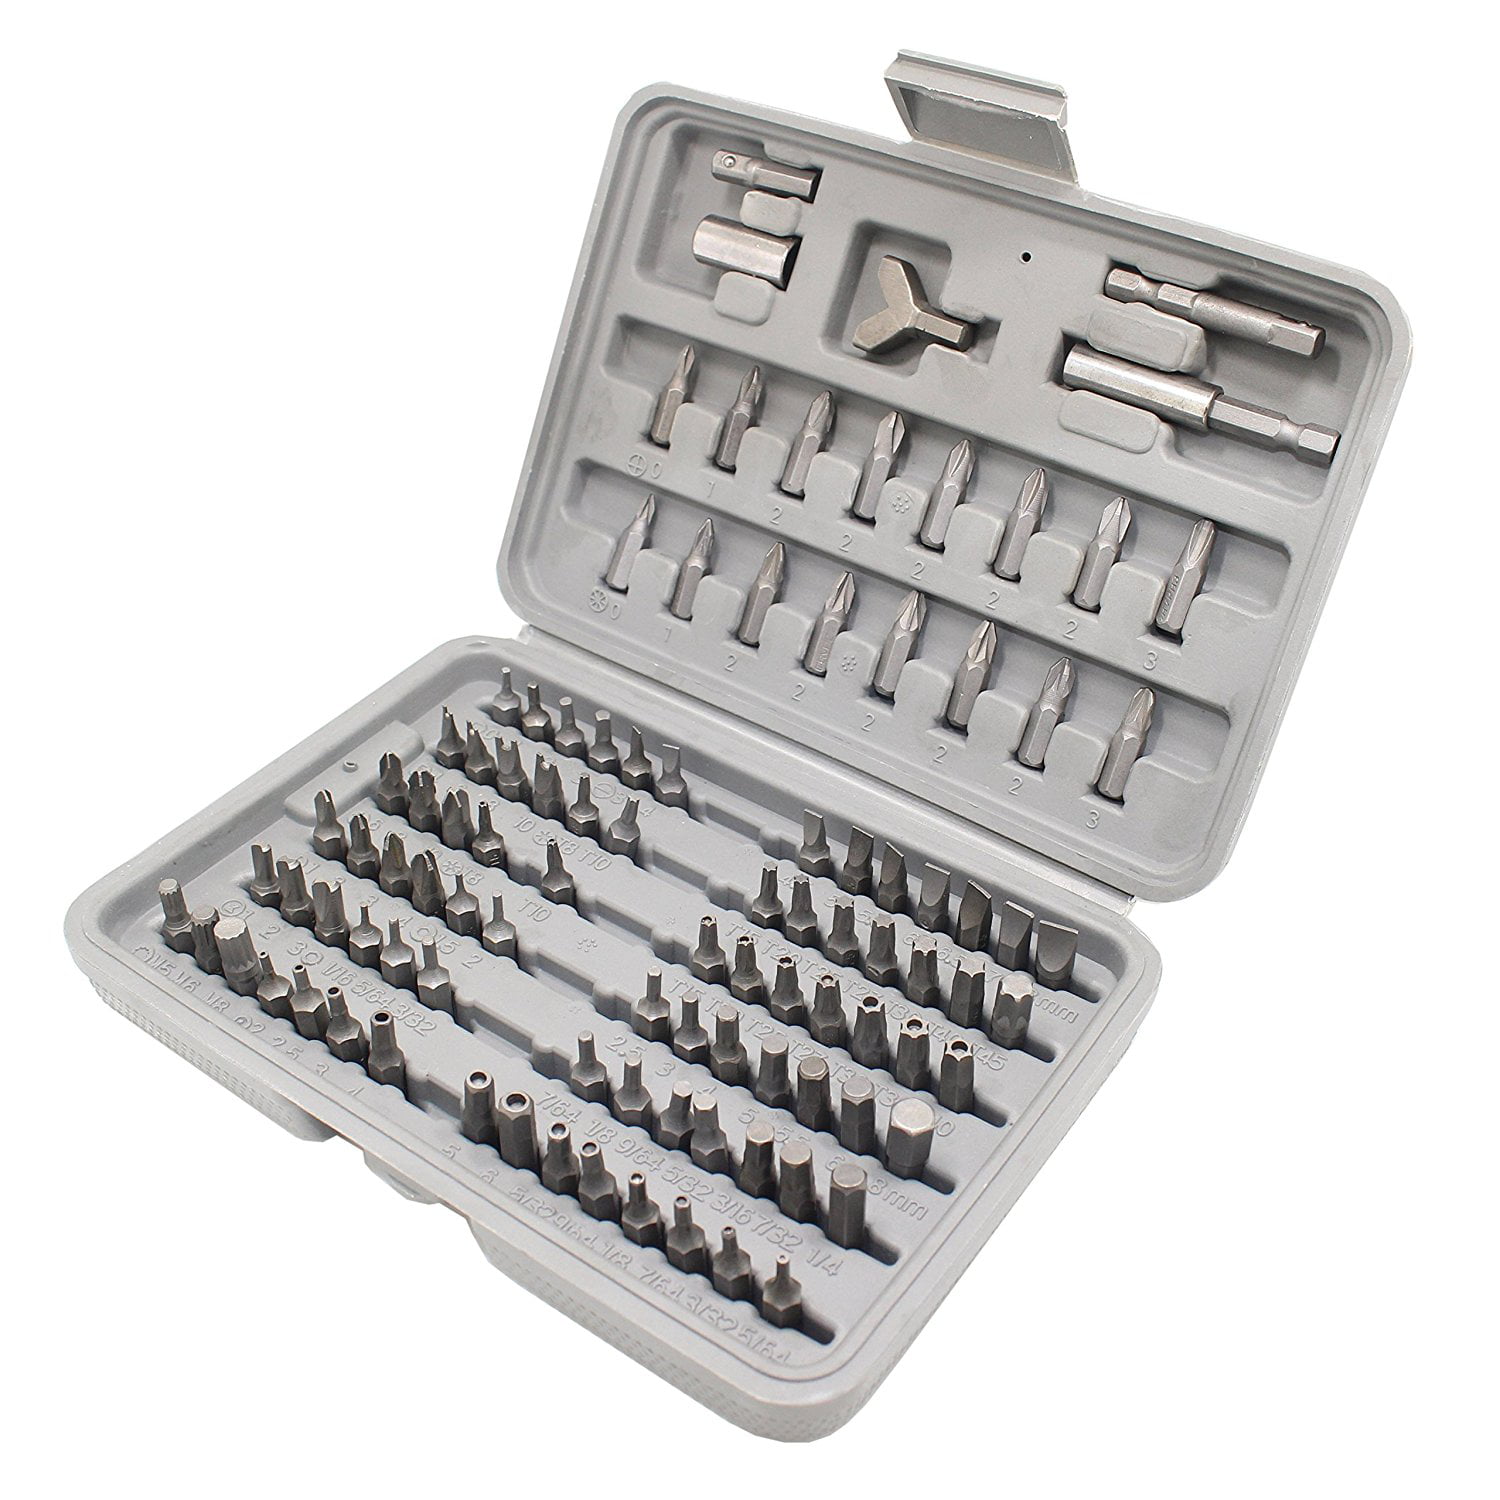 44PC SCREWDRIVER SET PHILLIPS TORX STAR SLOTTED HEX KEY SECURITY BITS 